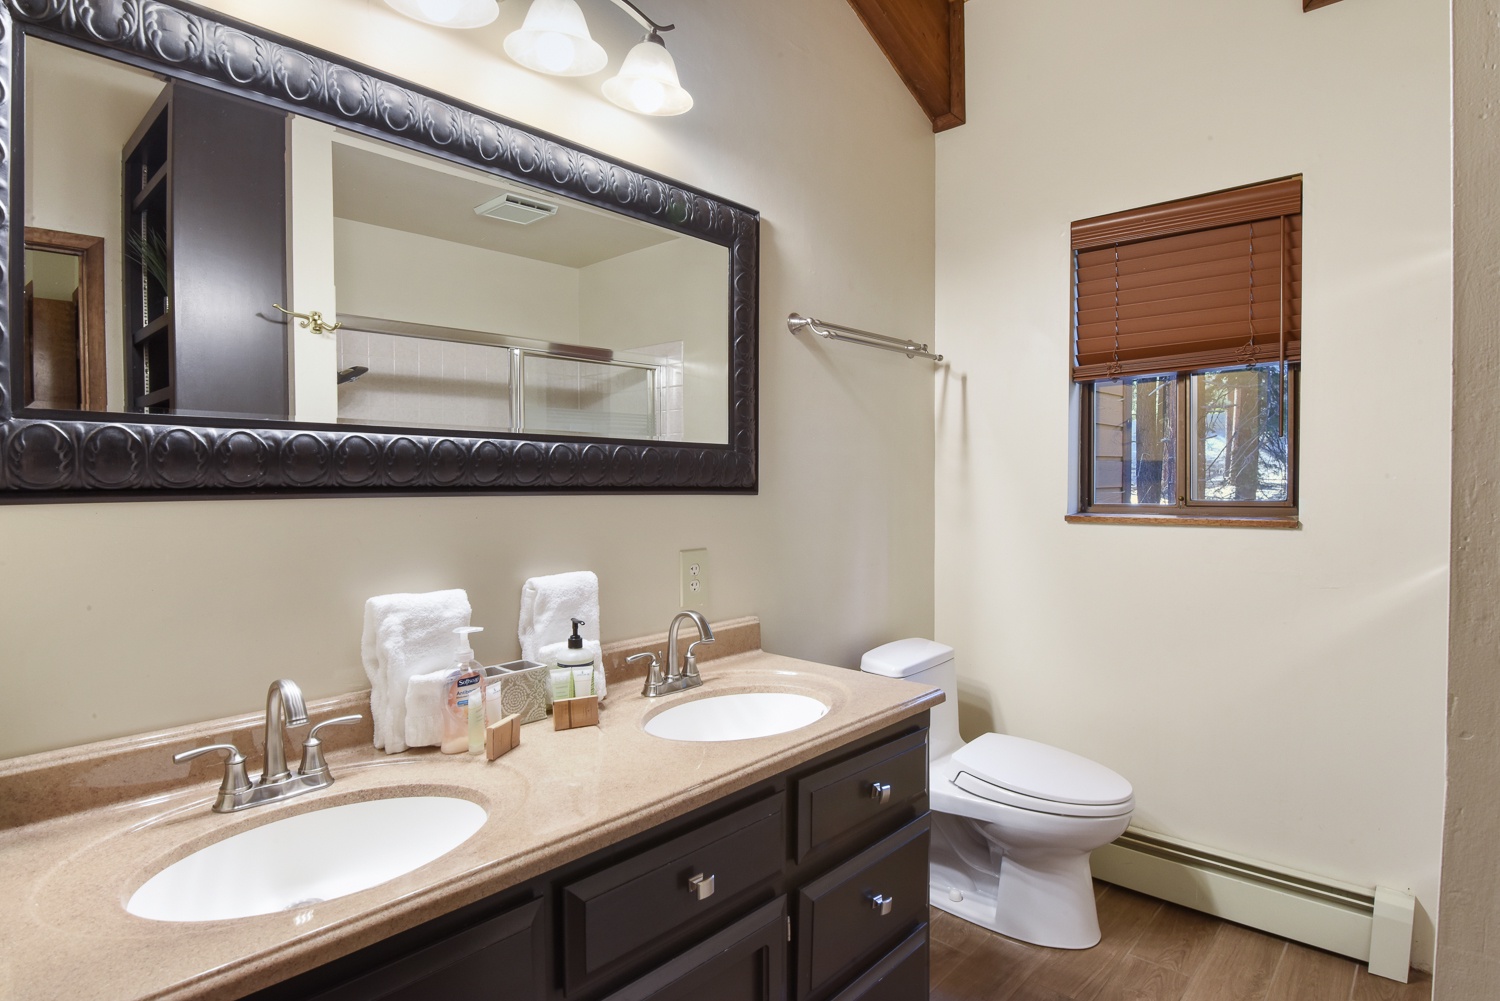 The 3rd level bathroom offers a spacious double vanity & shower/tub combo